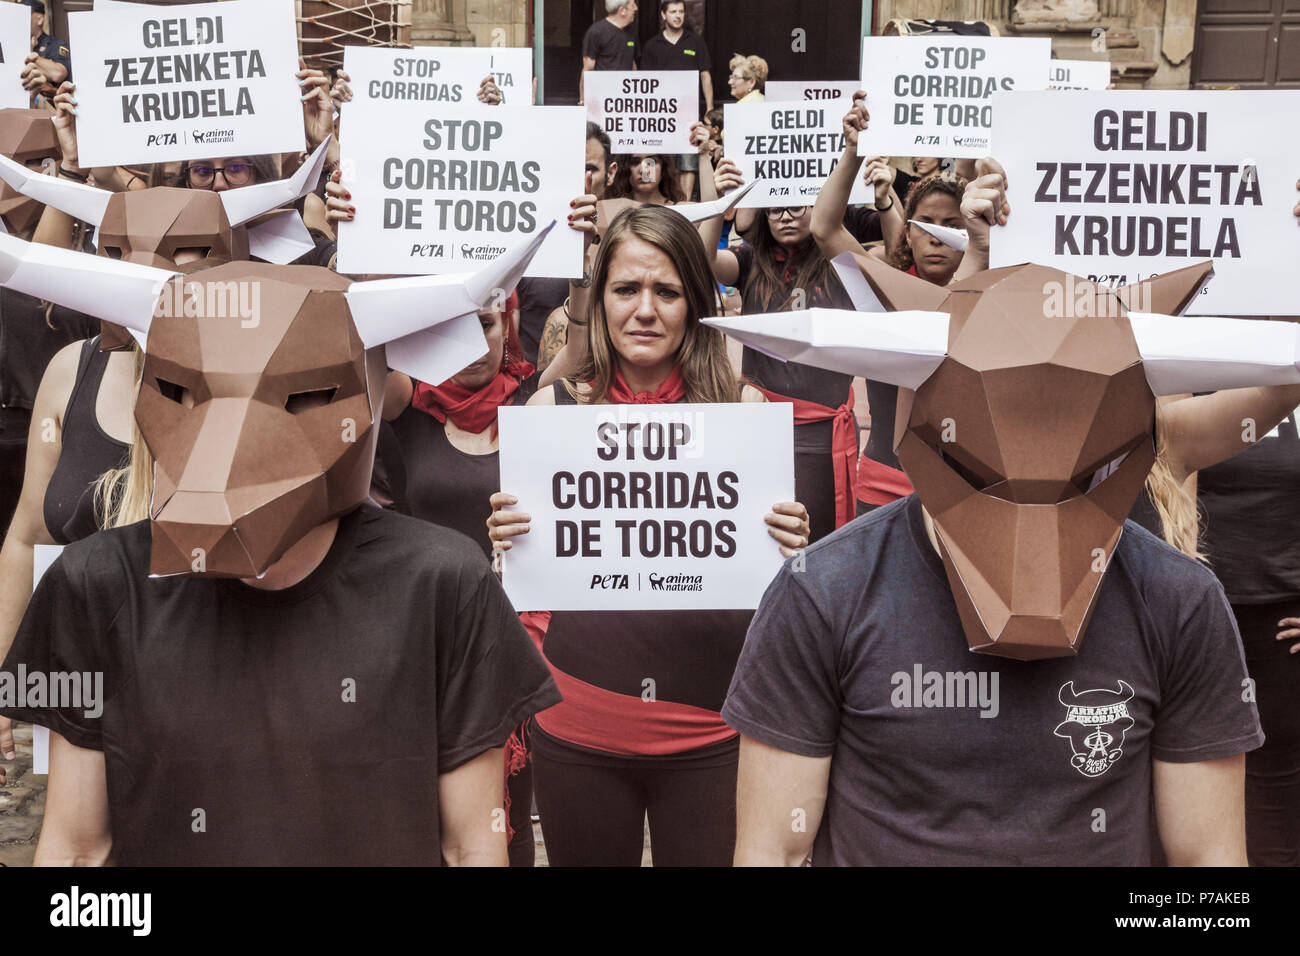 Pamplona, Navarra, Spain. 5th July, 2018. Protest against animal cruelty in bull fightings before San Fermin celebrations in Pamplona, Spain. Banner says ''stop bullfightings'' and some activists wear a paperboard bullhead mask. Credit: Celestino Arce/ZUMA Wire/Alamy Live News Stock Photo